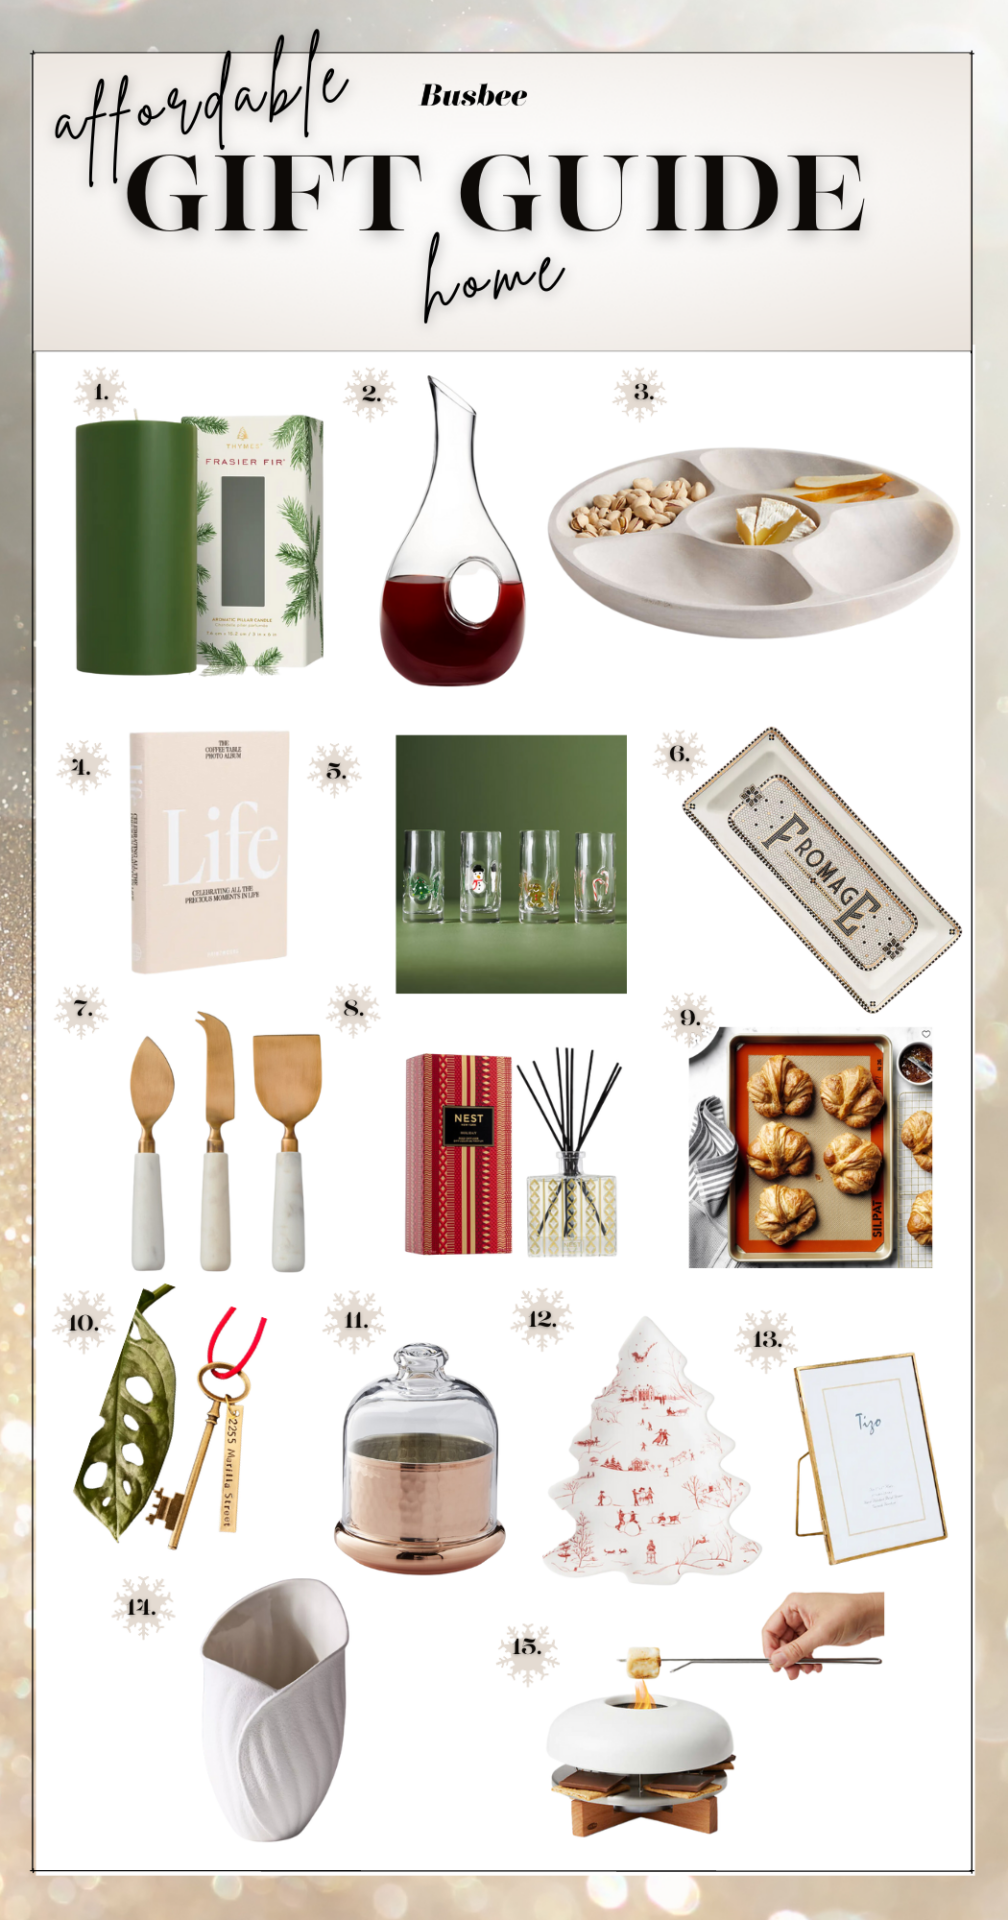 Holiday gift guide: the best gift ideas for women over 40